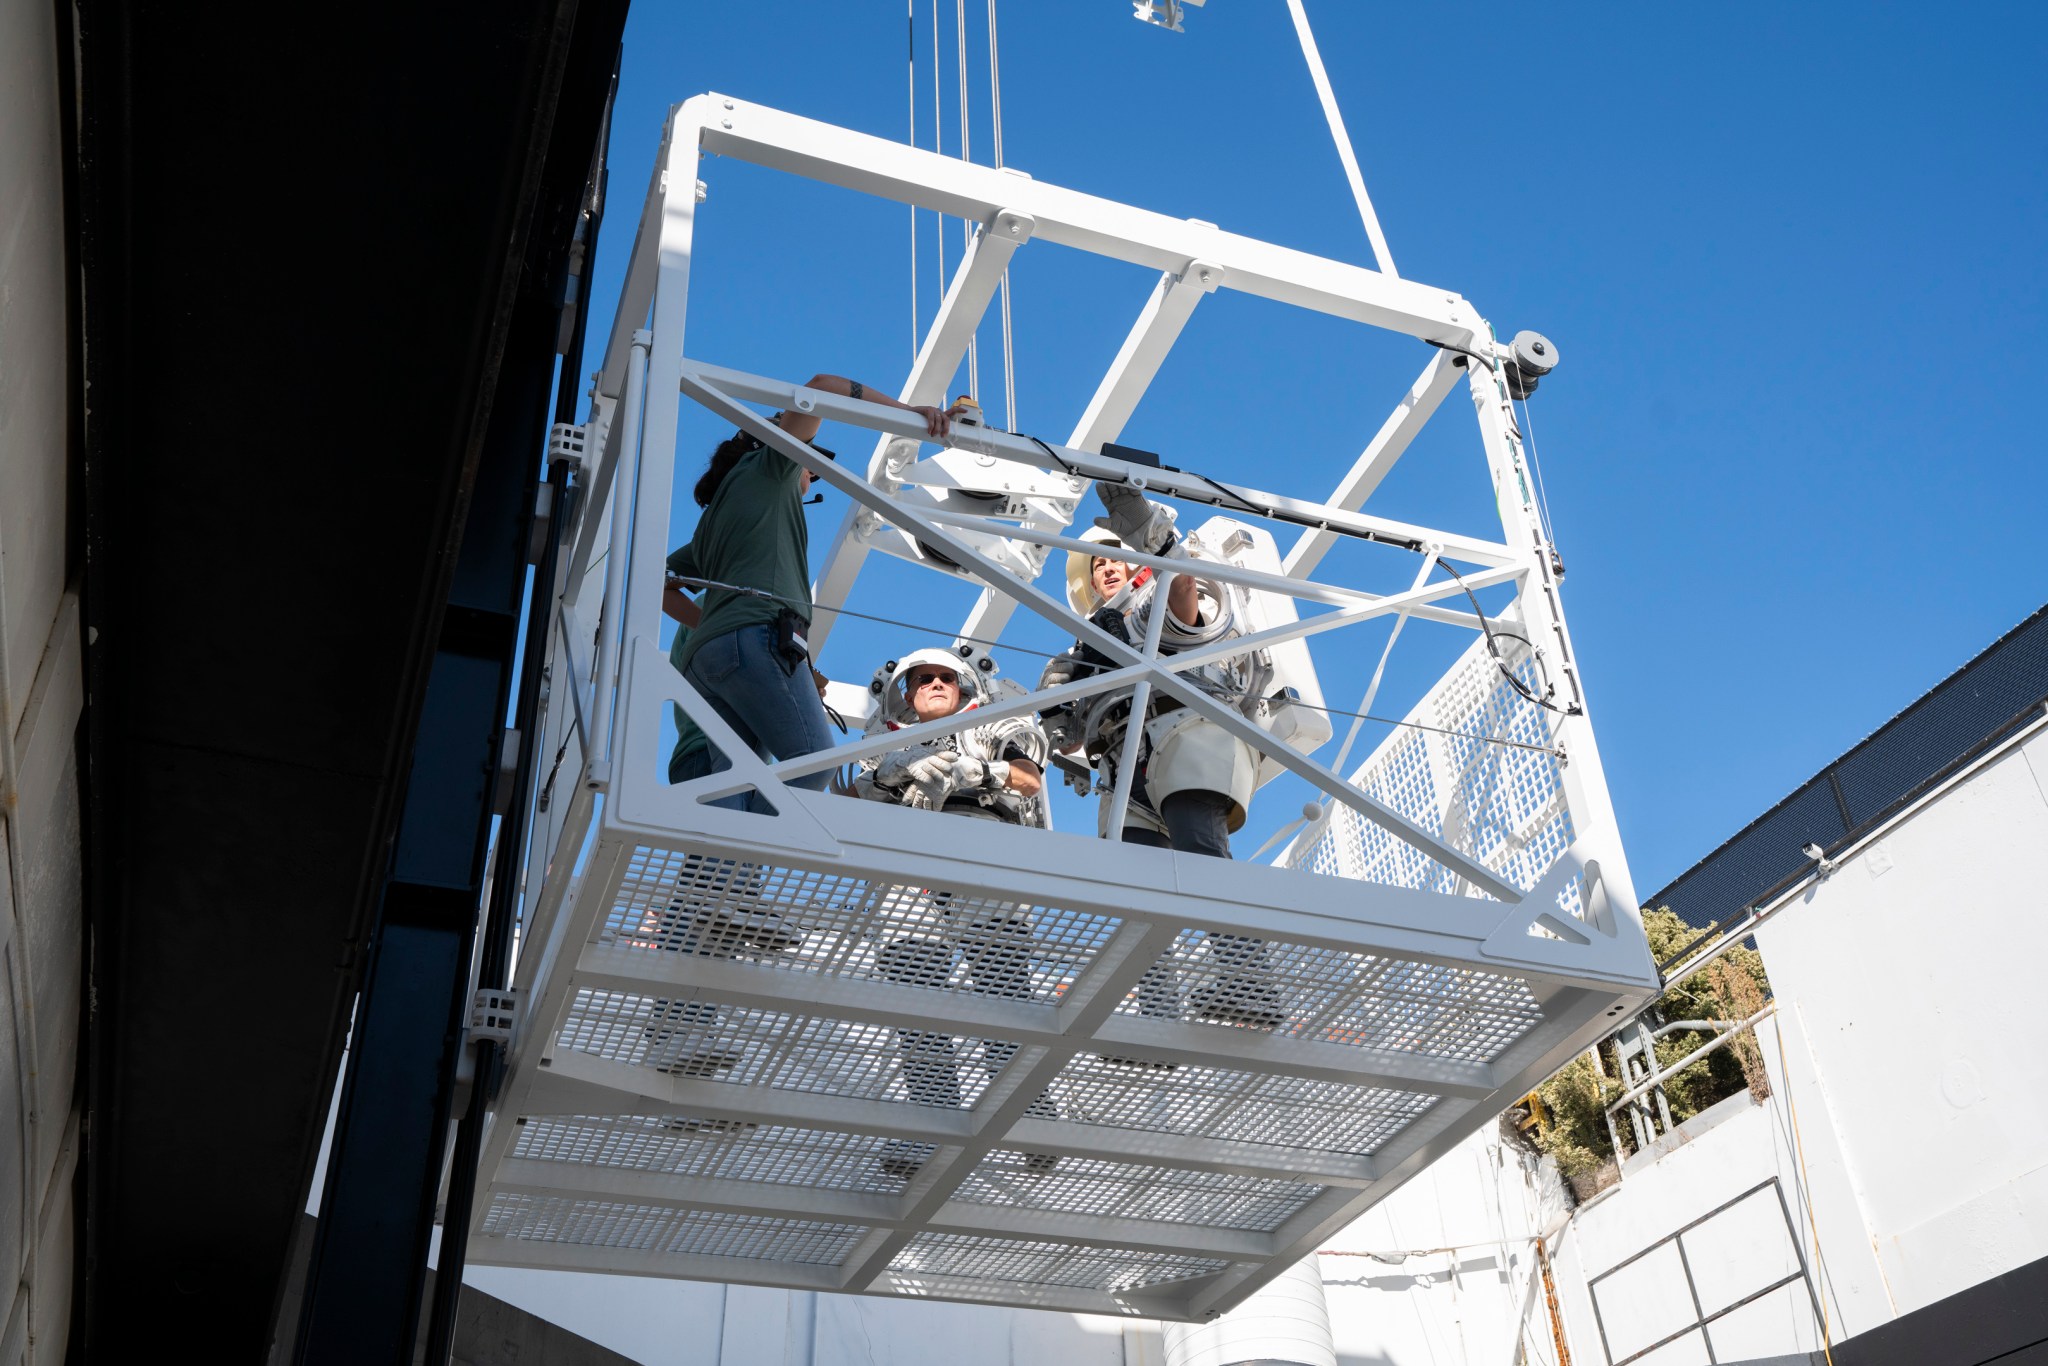 NASA astronauts Nicole Mann and Doug “Wheels” Wheelock participated in a recent test of a sub-scale mockup elevator for SpaceX’s Starship human landing system that will be used for NASA’s Artemis III and IV missions to the Moon.